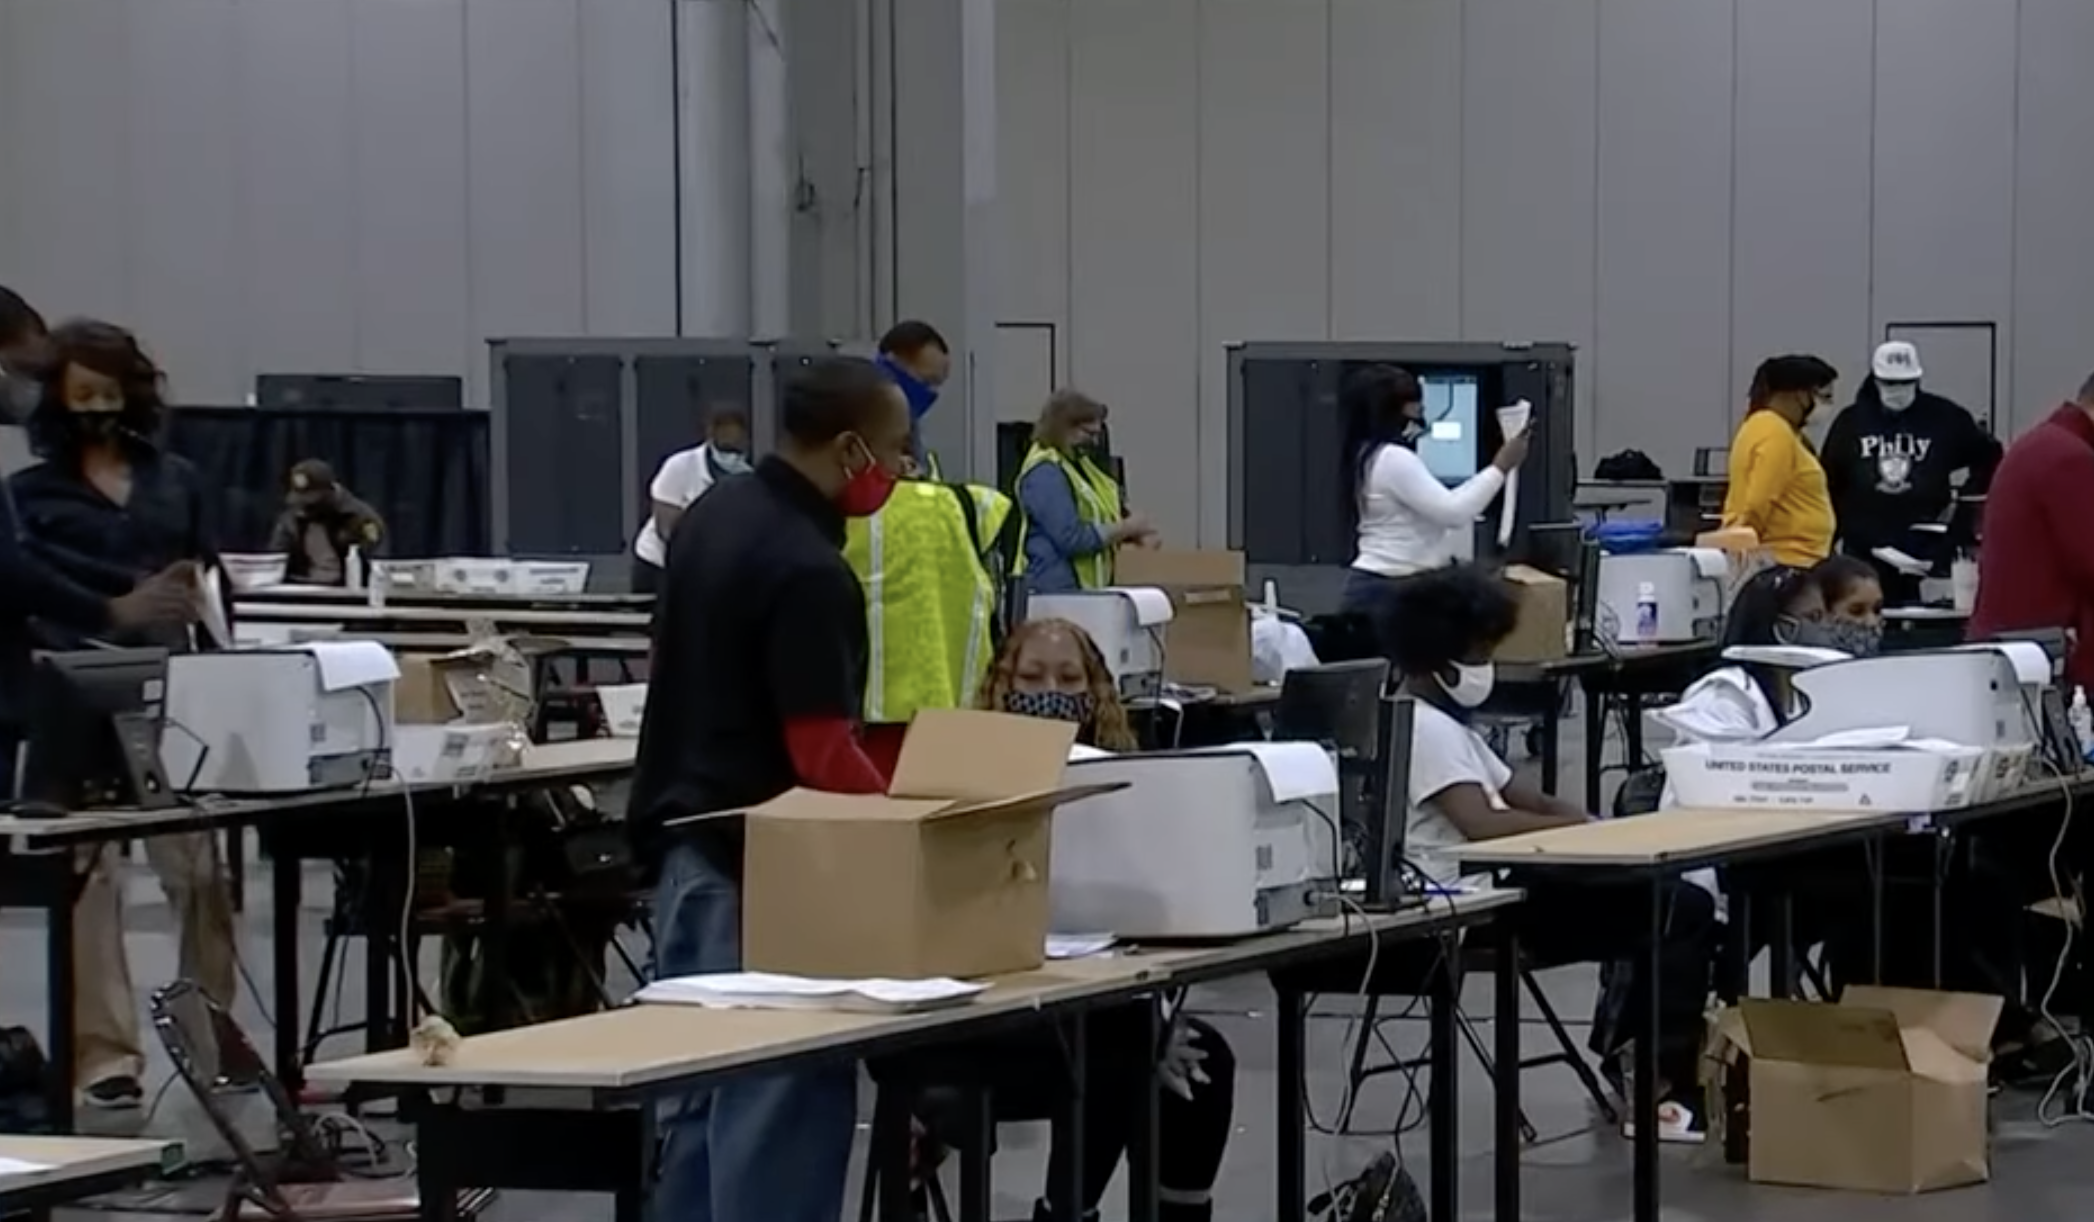 OPEN RECORDS REQUEST SHOWS FULTON COUNTY MADE UP 17K VOTES IN 2020 – ELECTION SHOULD BE DECERTIFIED